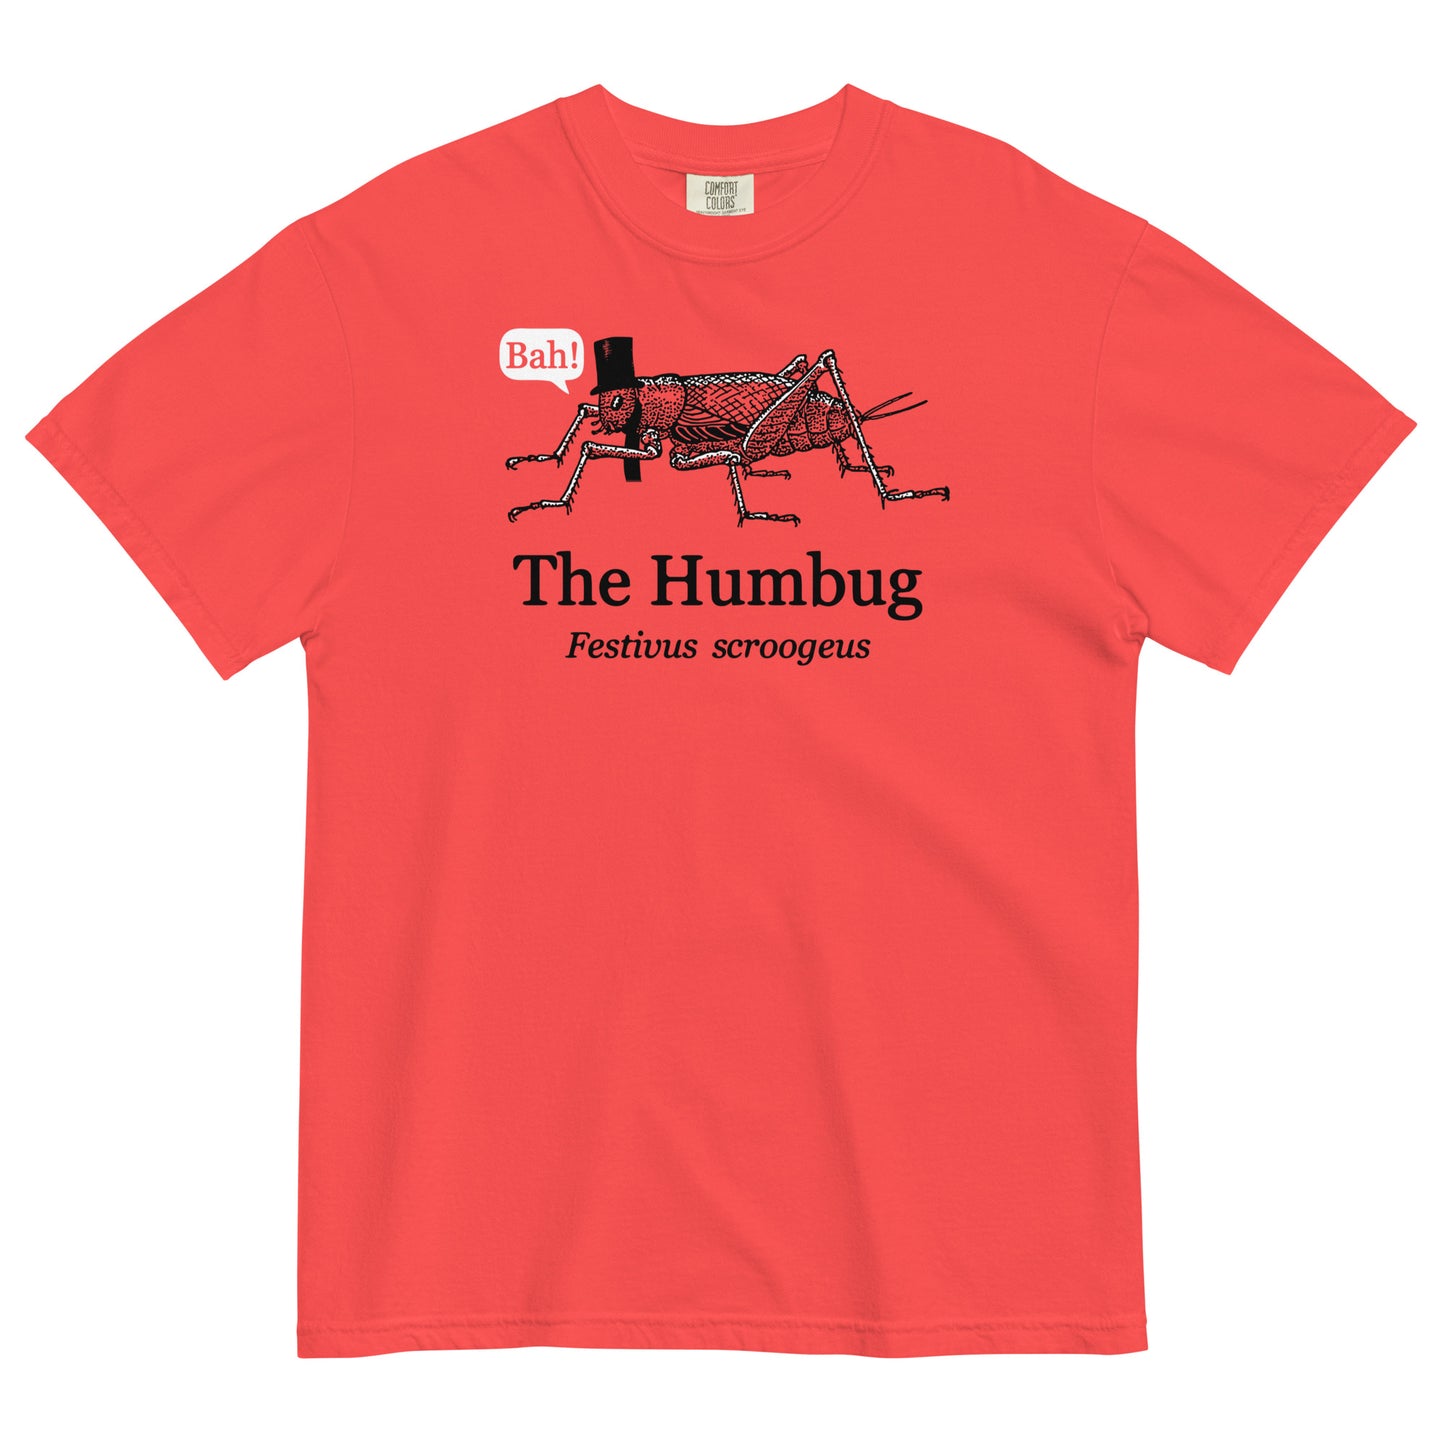 The Humbug Men's Relaxed Fit Tee